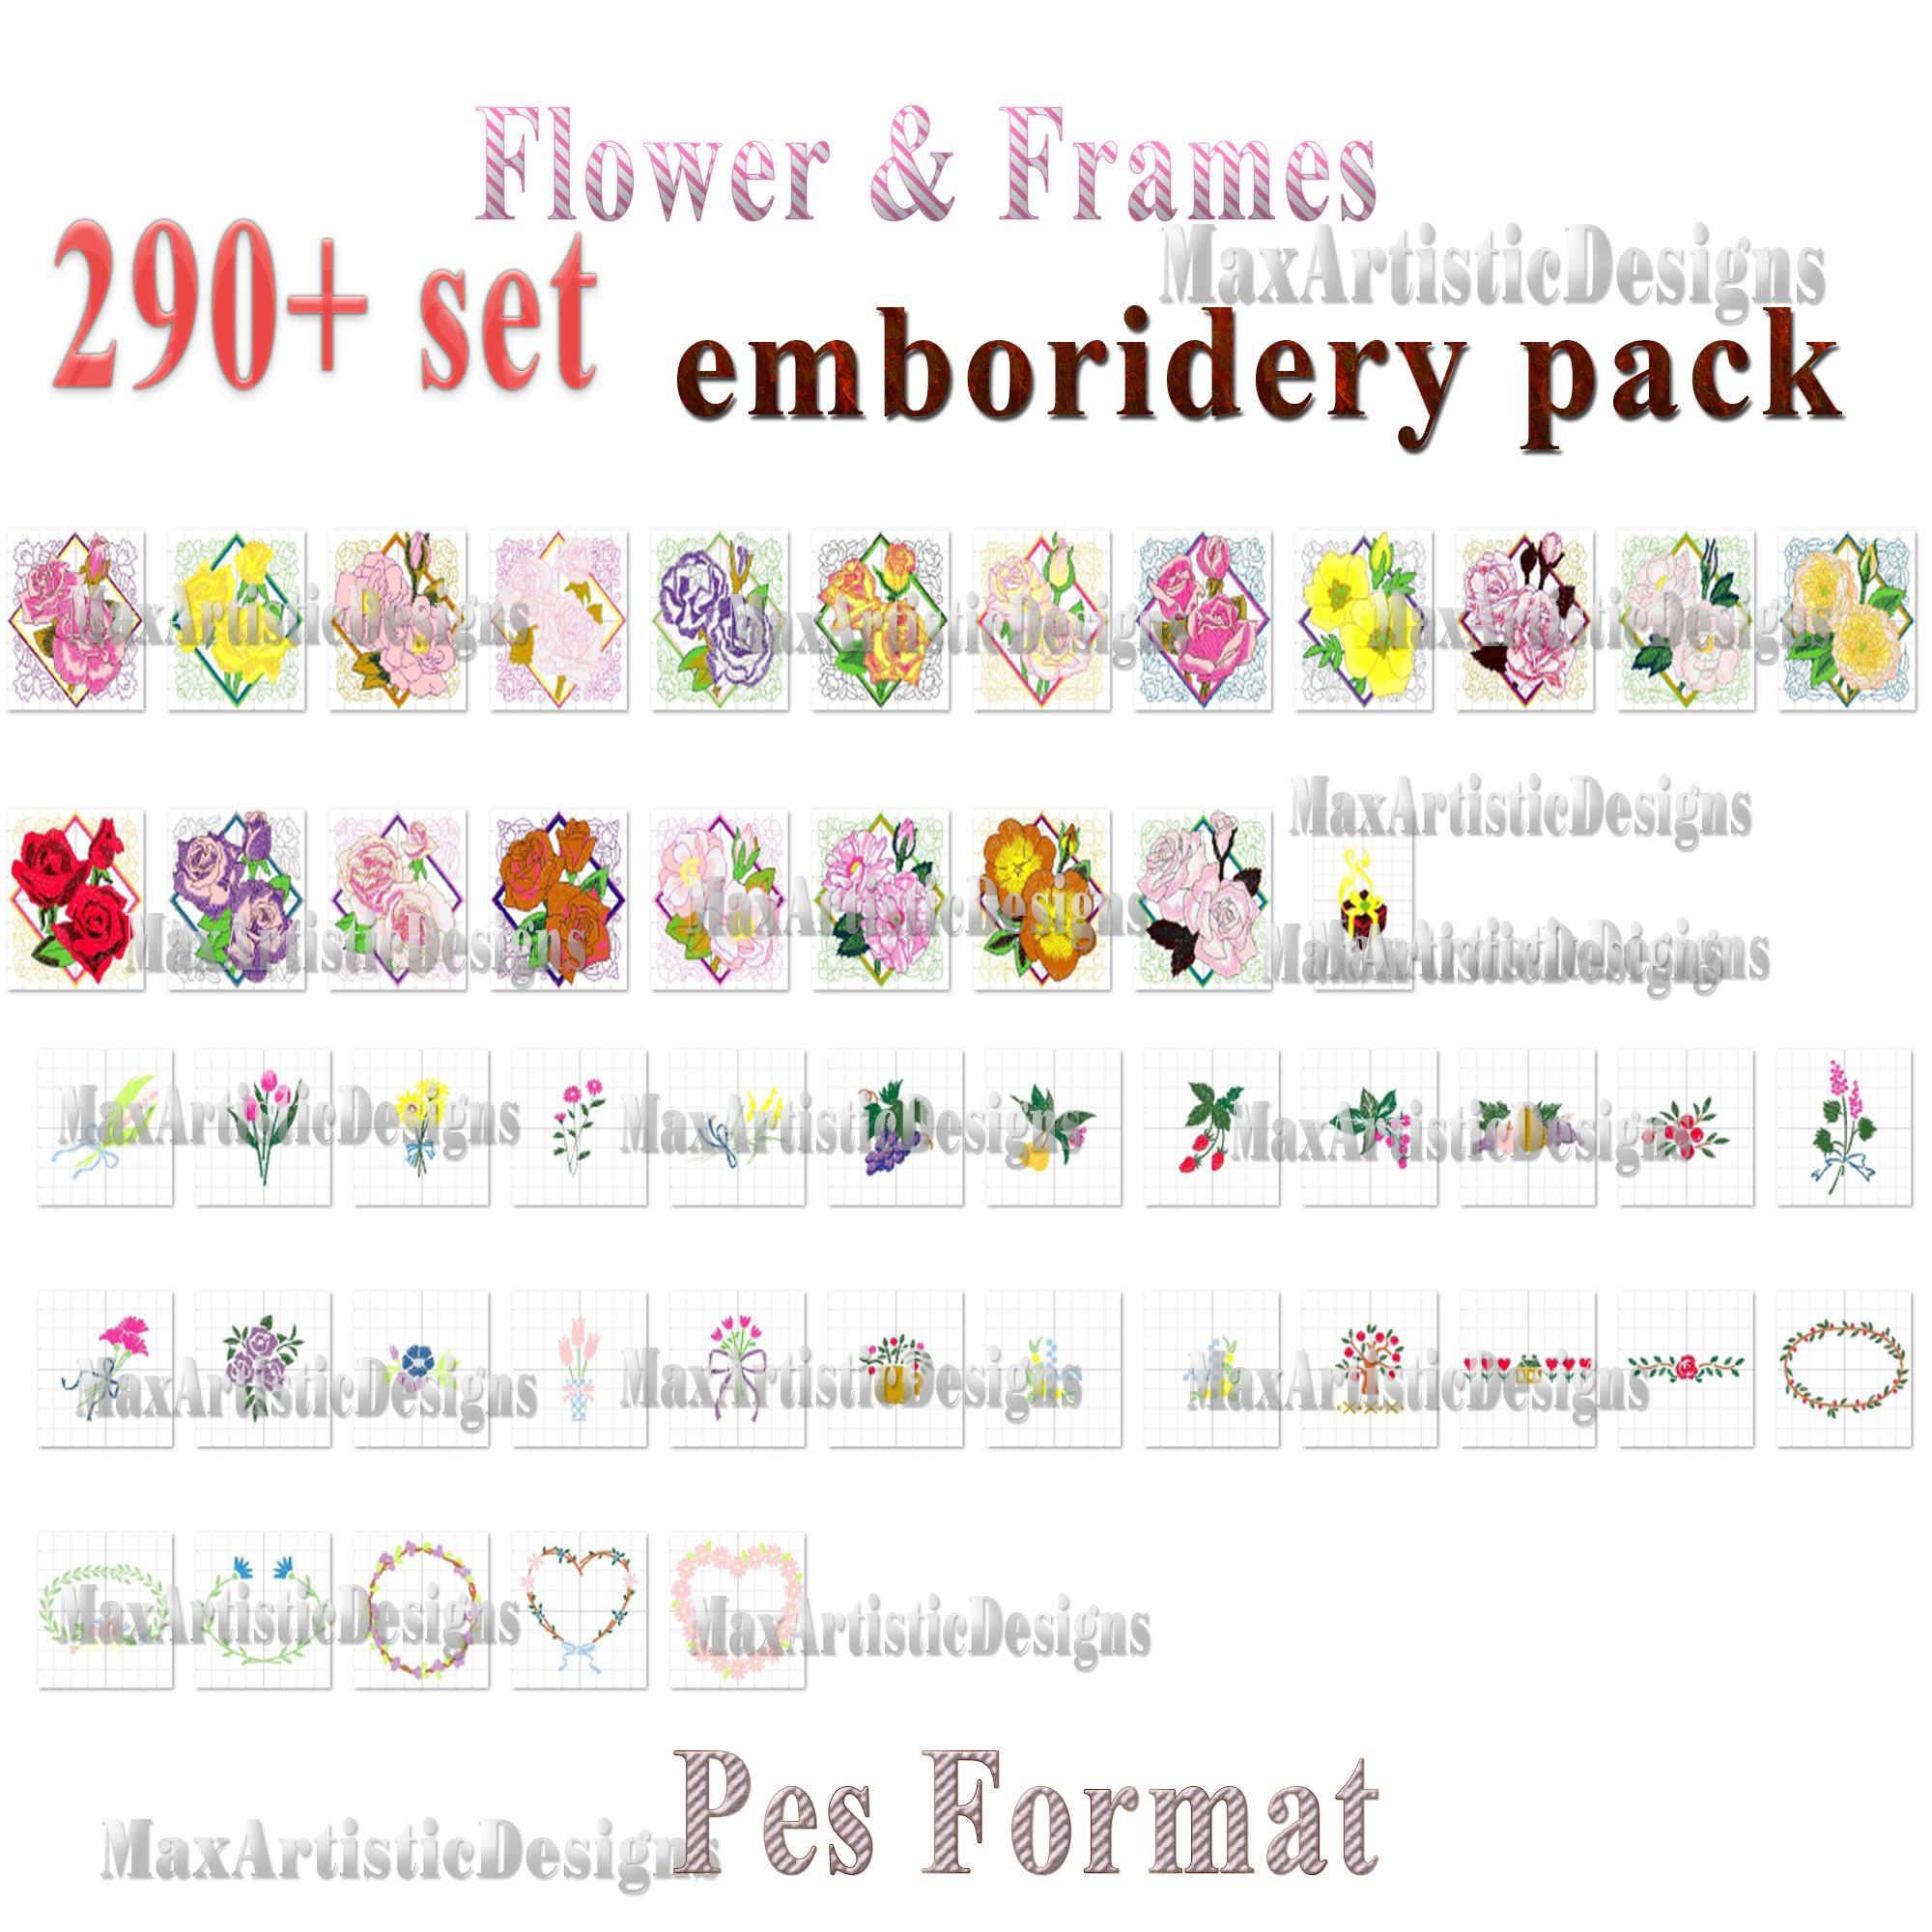 290+ Flowers and Frames embroidery patterns Machine embroidery designs